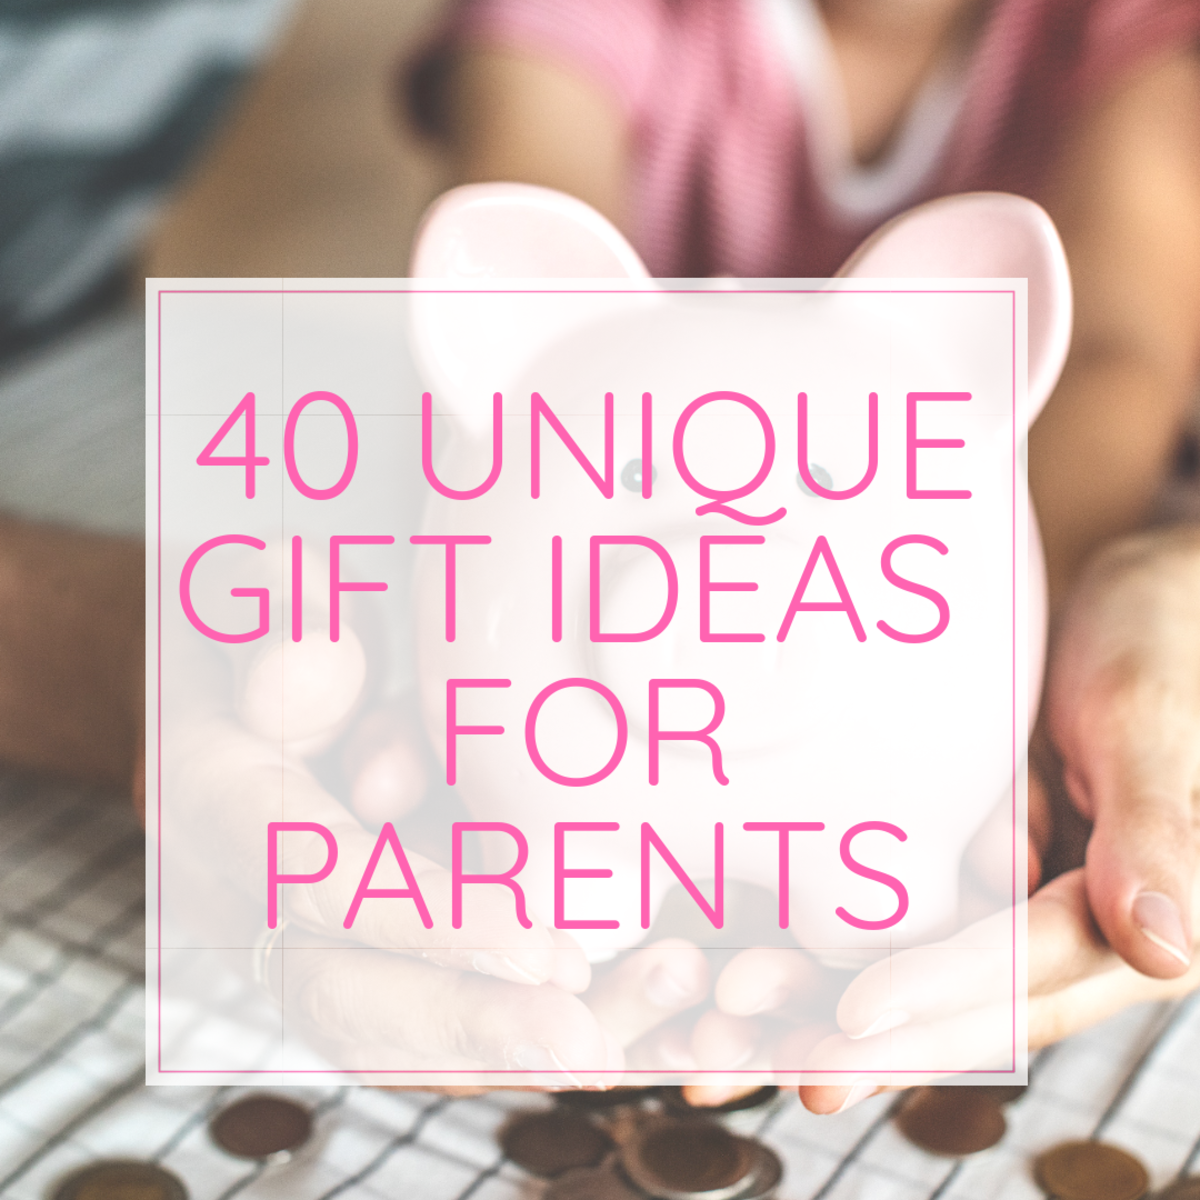 Original Gift Ideas for Seniors Who Don't Want Anything ...